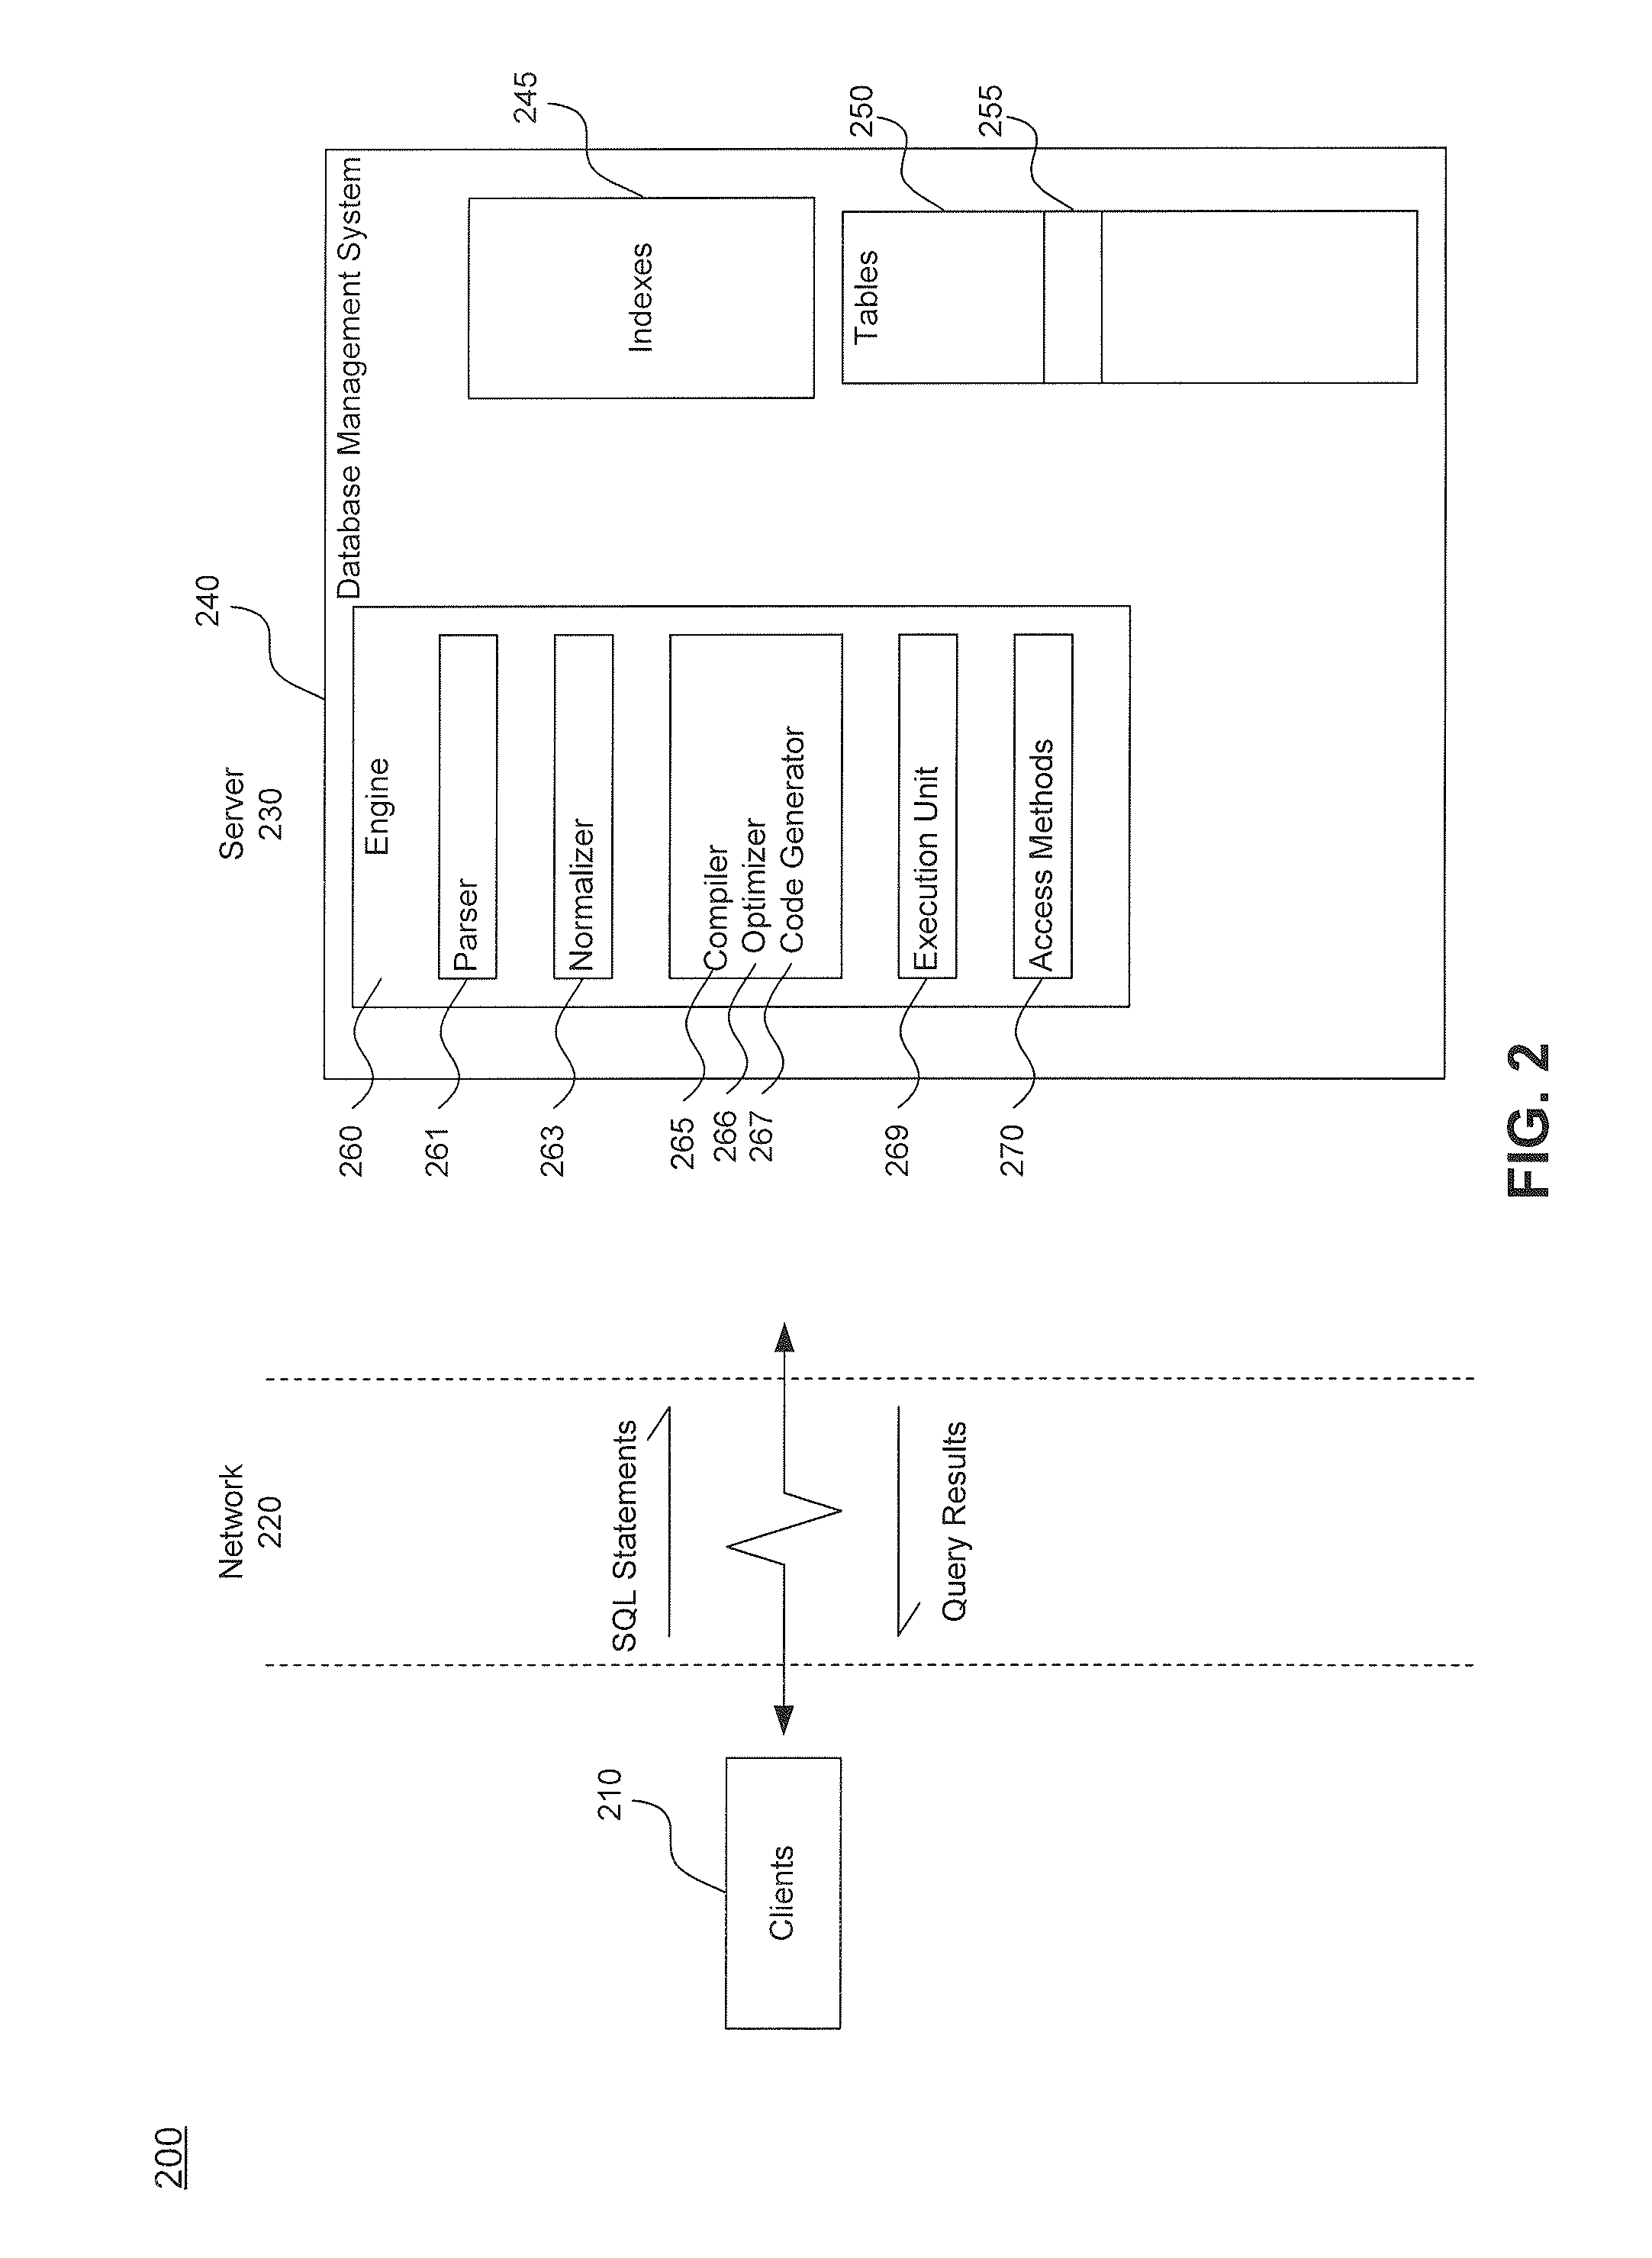 Managing data backup of an in-memory database in a database management system